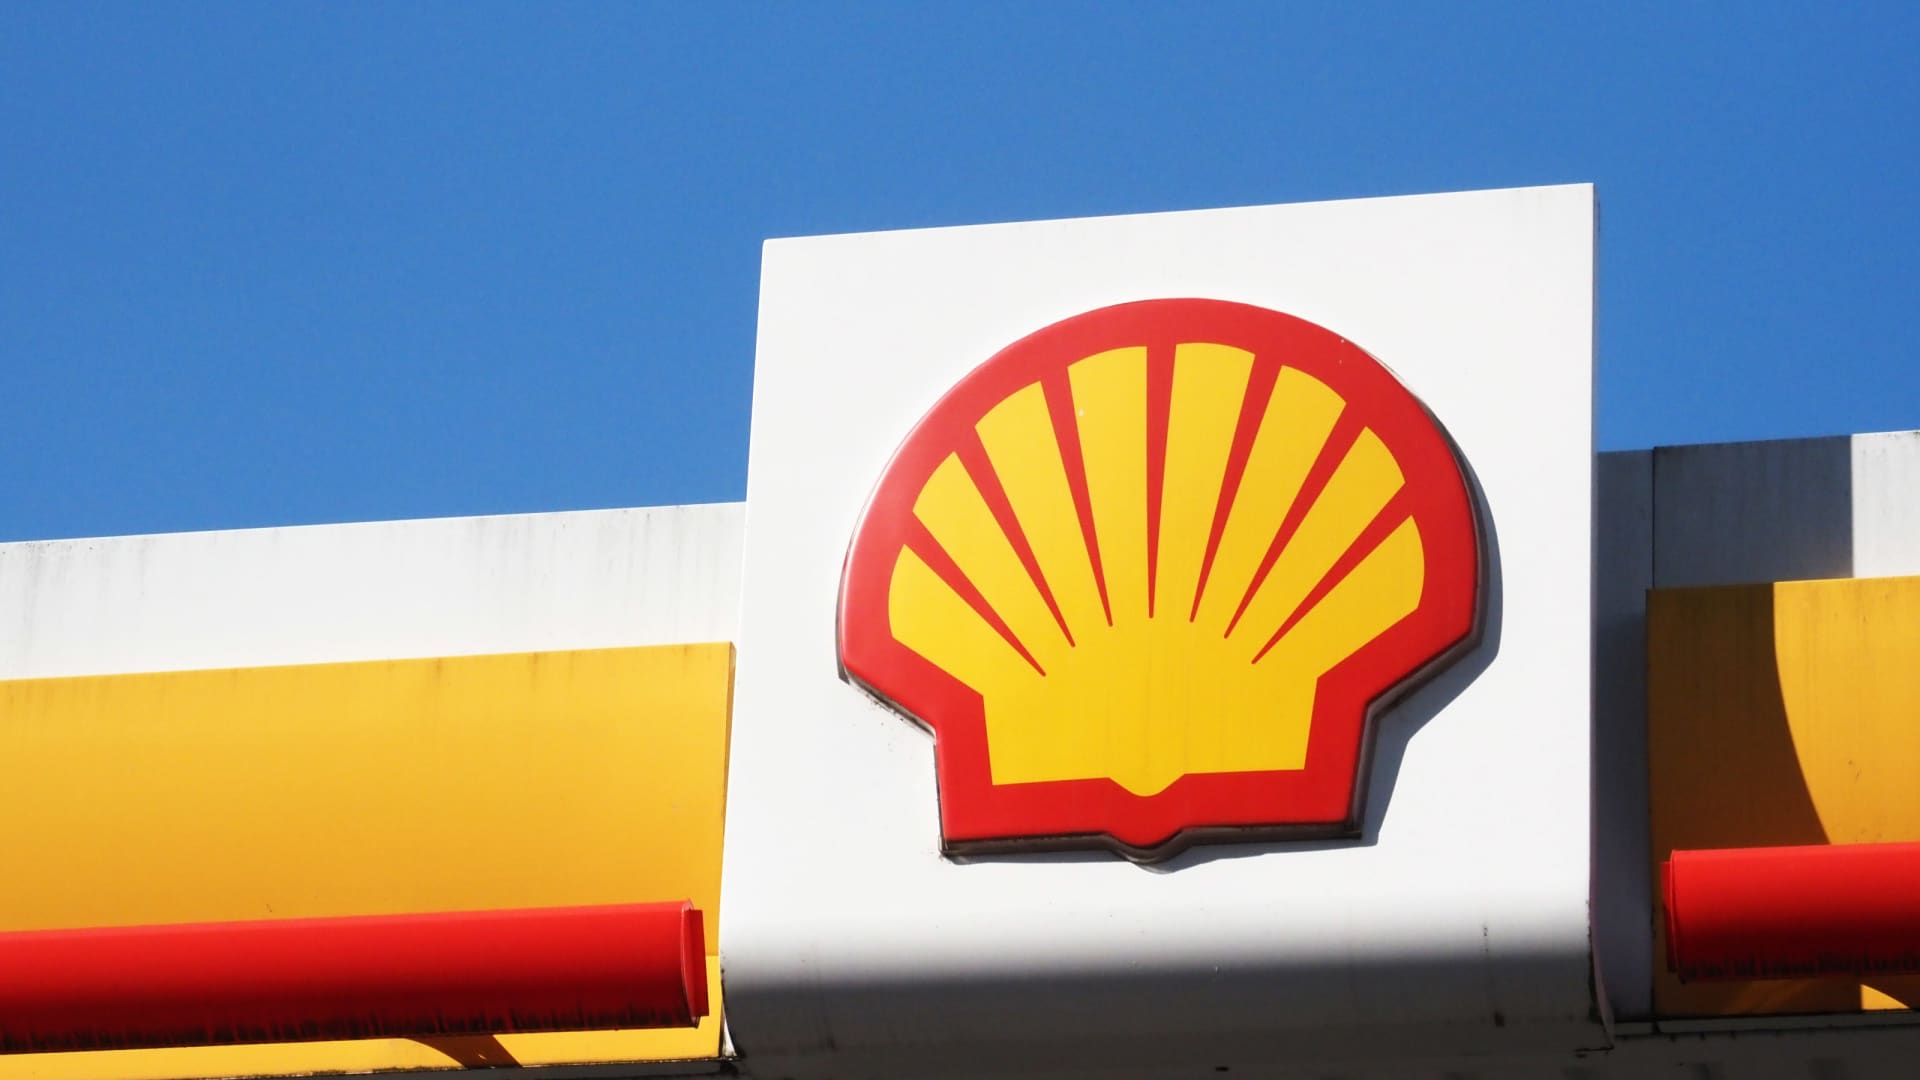 Shell beats expectations with .6 billion in first-quarter profit, boosted by fuel trading